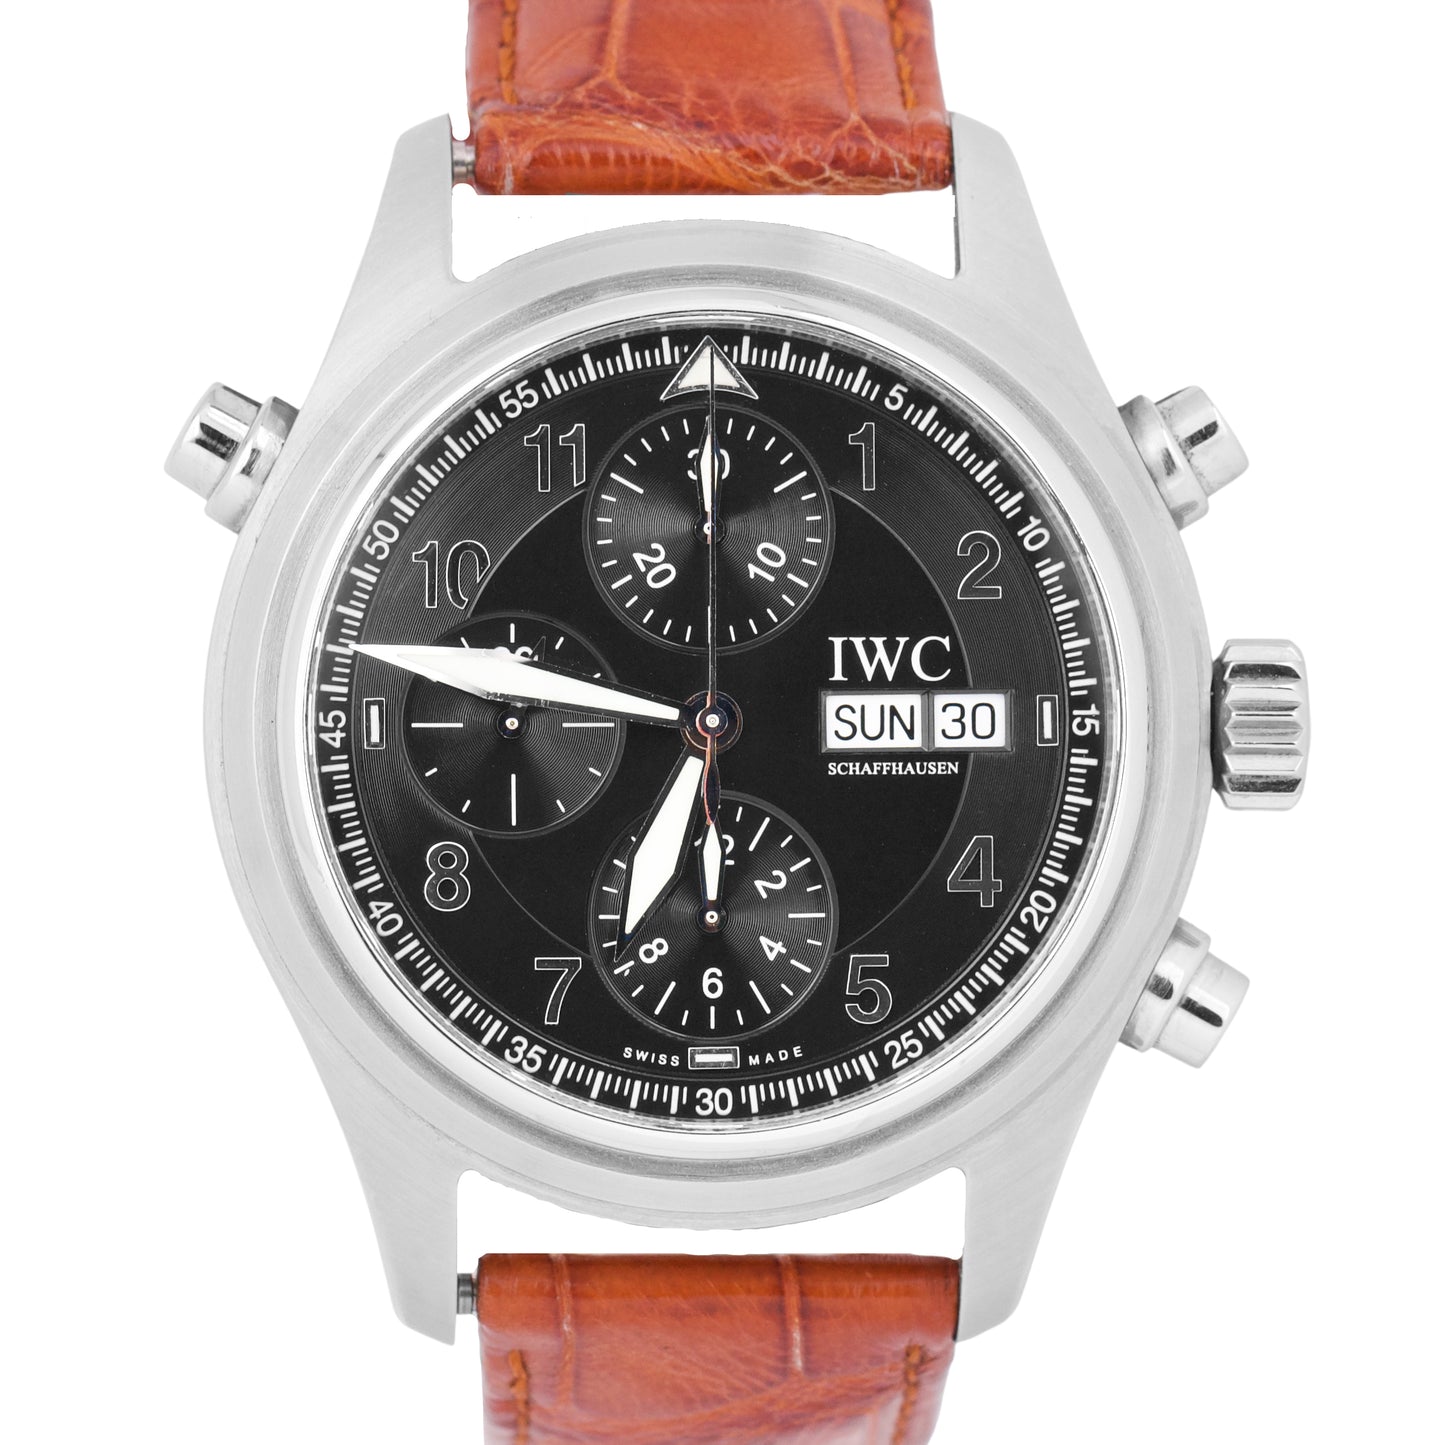 IWC Pilot Spitfire Doppelchronograph IW3713 Stainless Leather 3713 42mm Watch